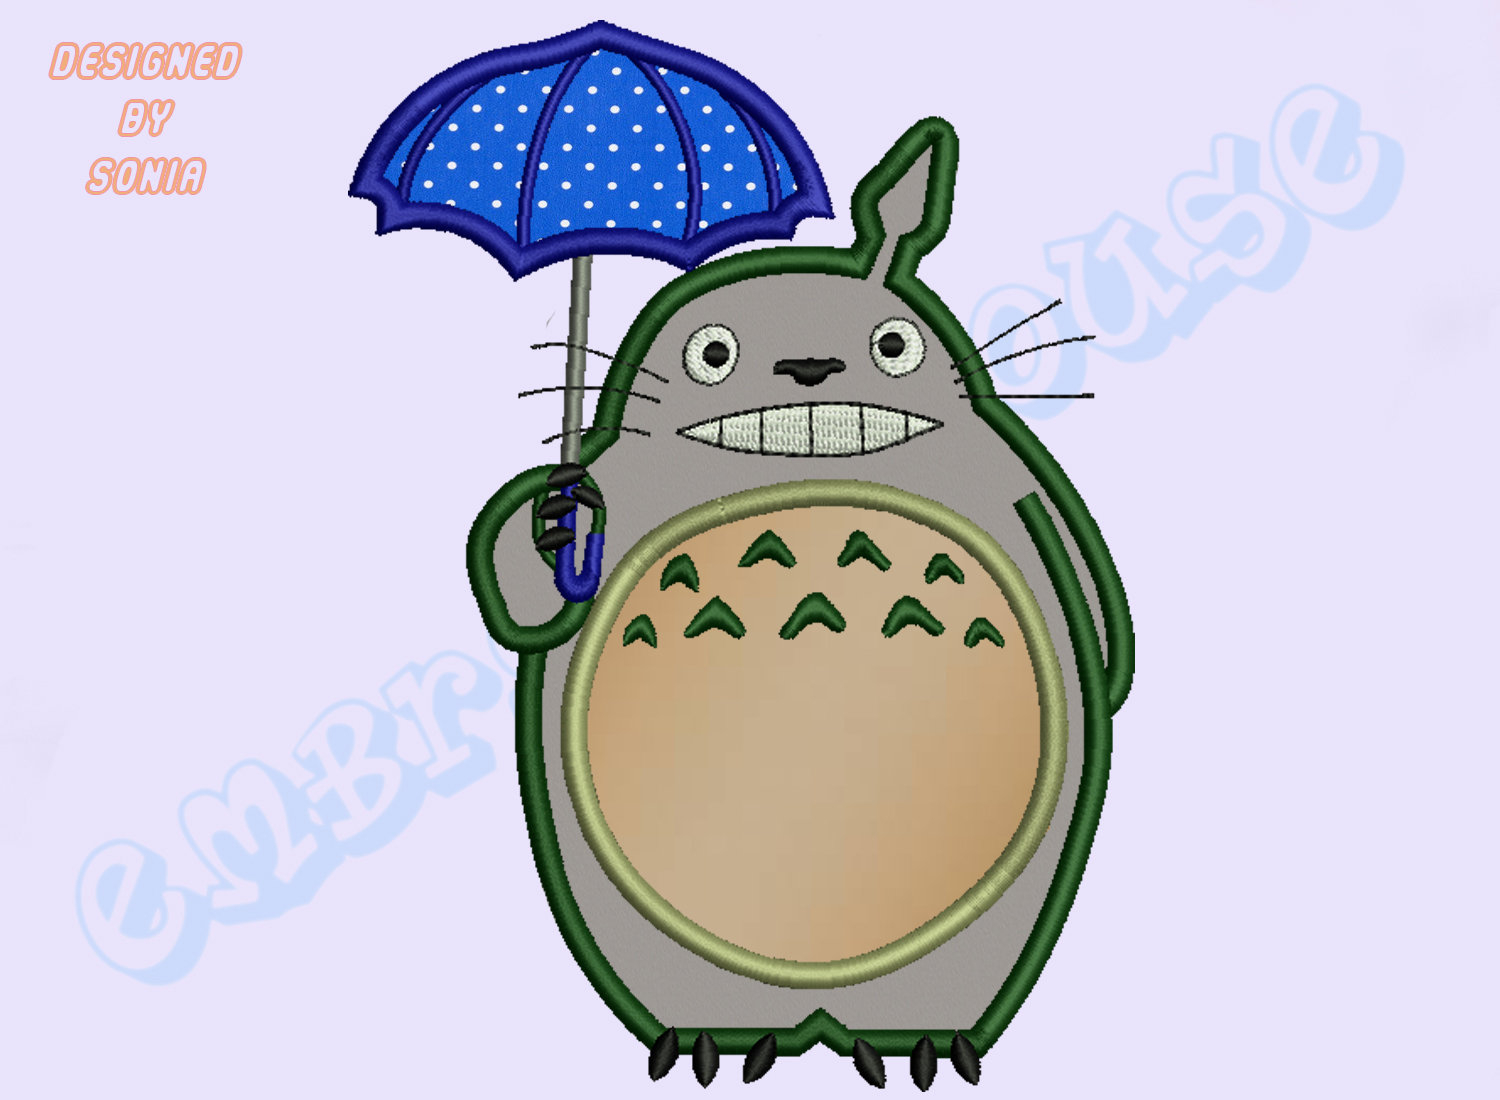 Totoro Embroidery Pattern Totoro Applique Embroidery Designs My Neighbor Totoro Machine Embroidery Designs Digital Download File Set Of 8 Formats In 4 Size 065